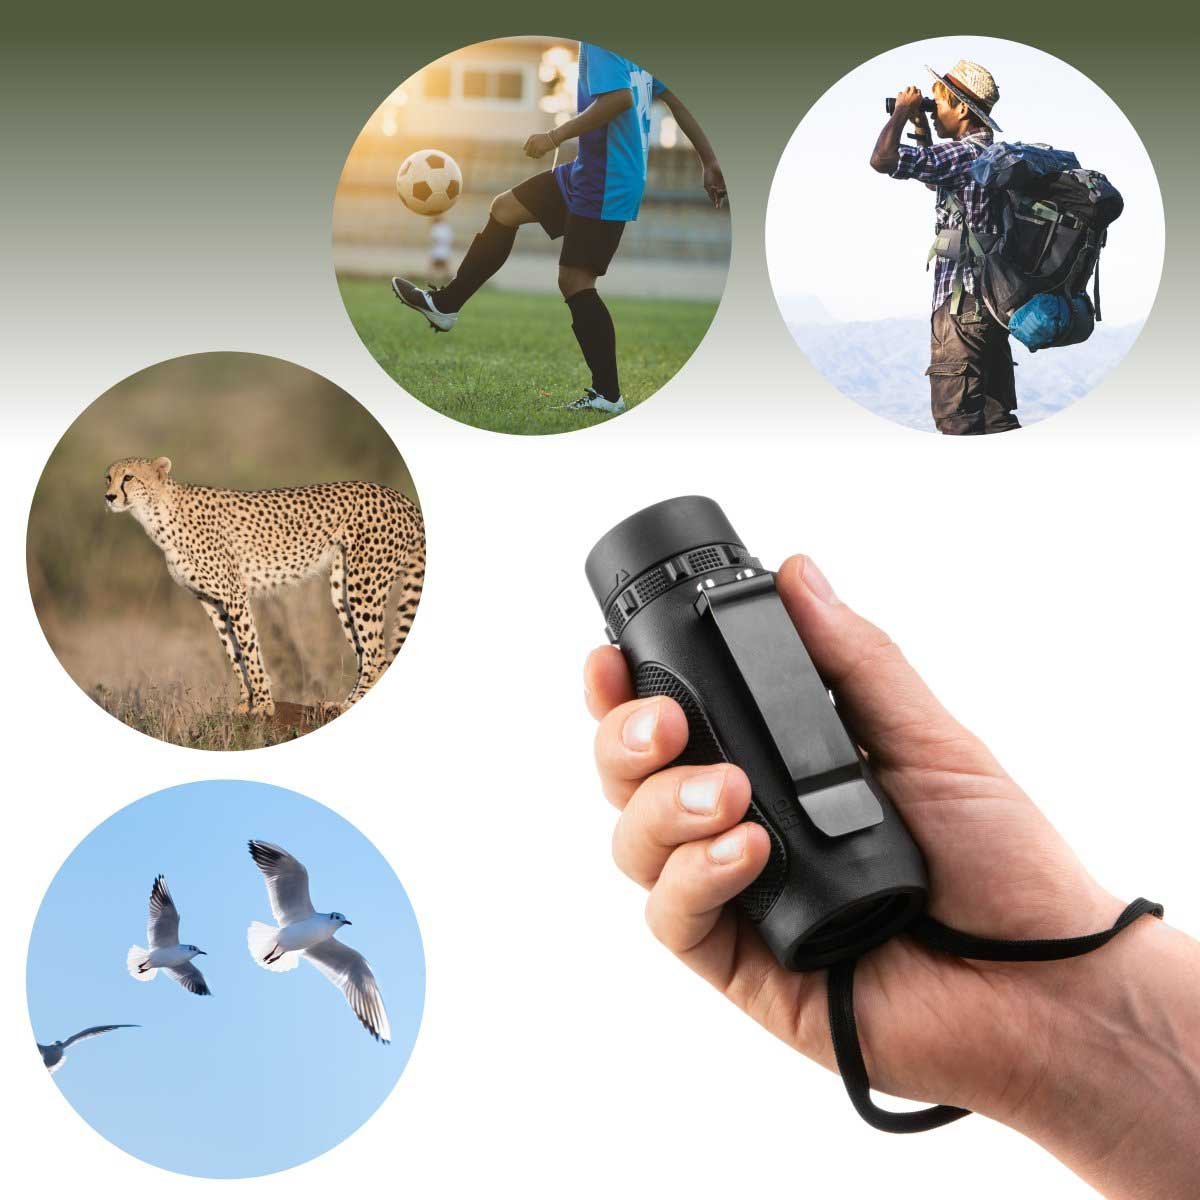 Nisus monocular could be used while watching the animals, birds, or sunsets